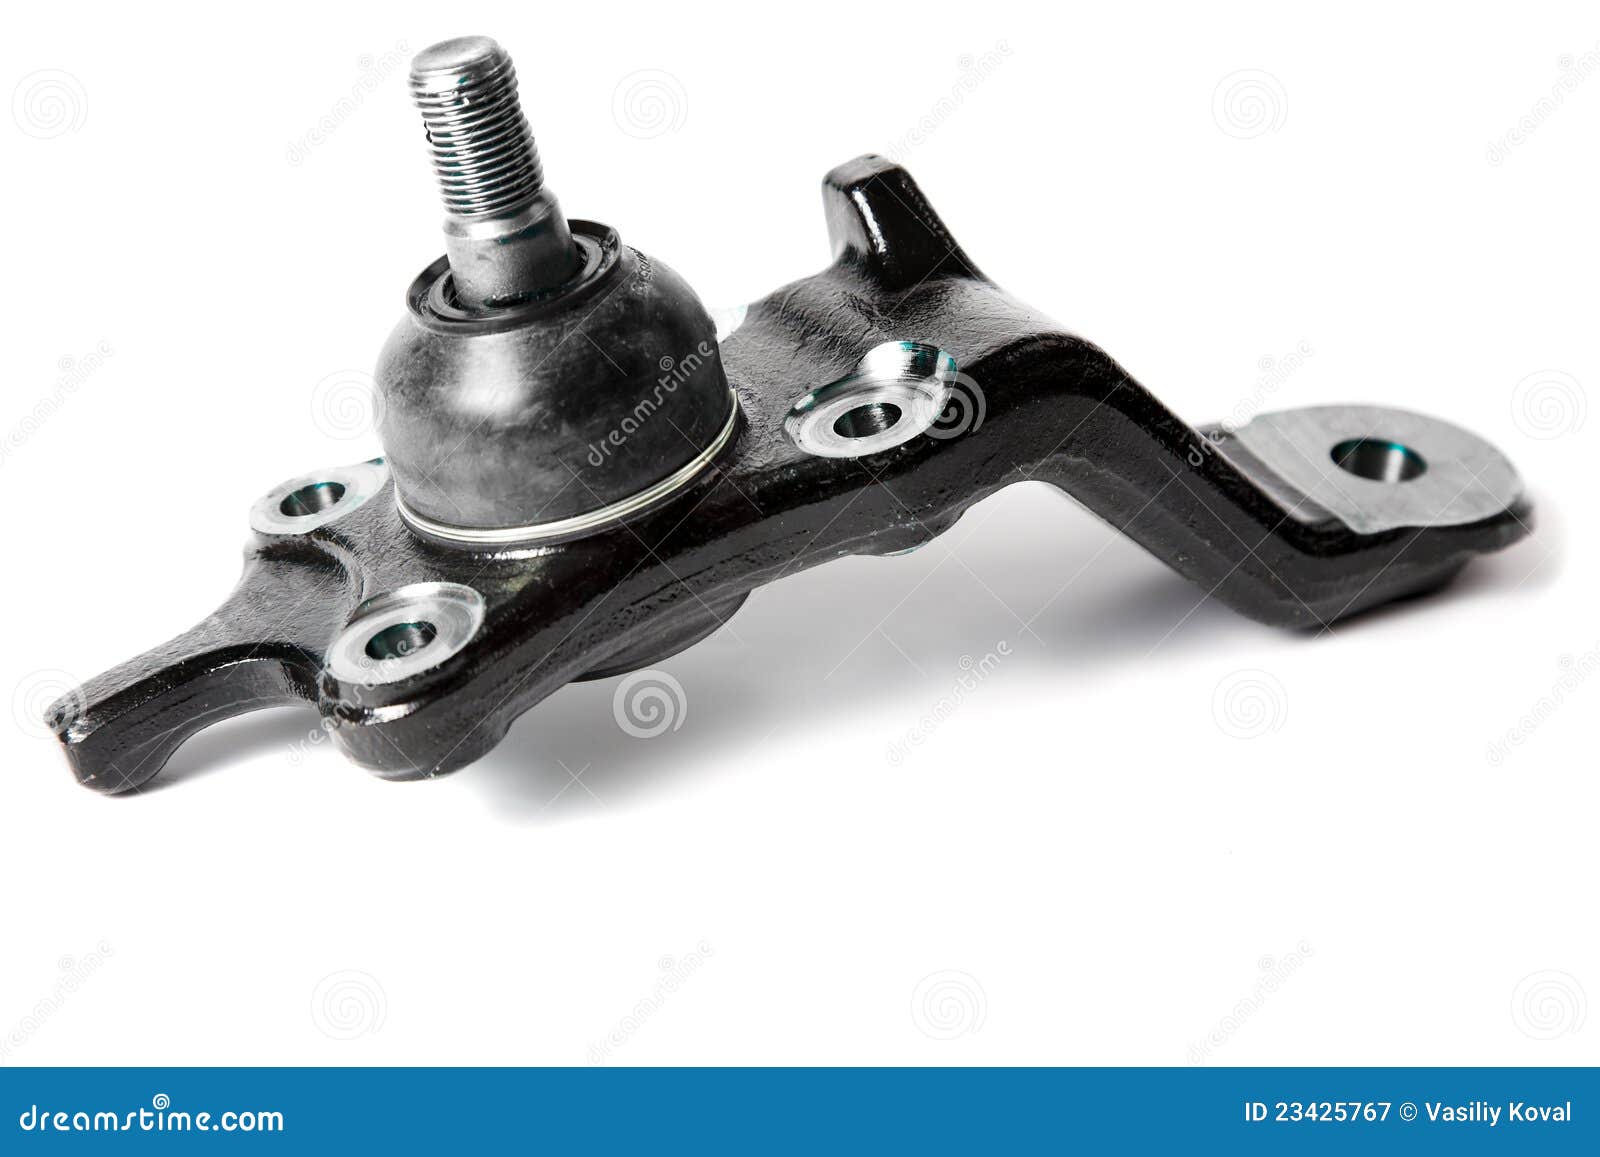 Car spare stock image. Image of precision, replacement - 23425767